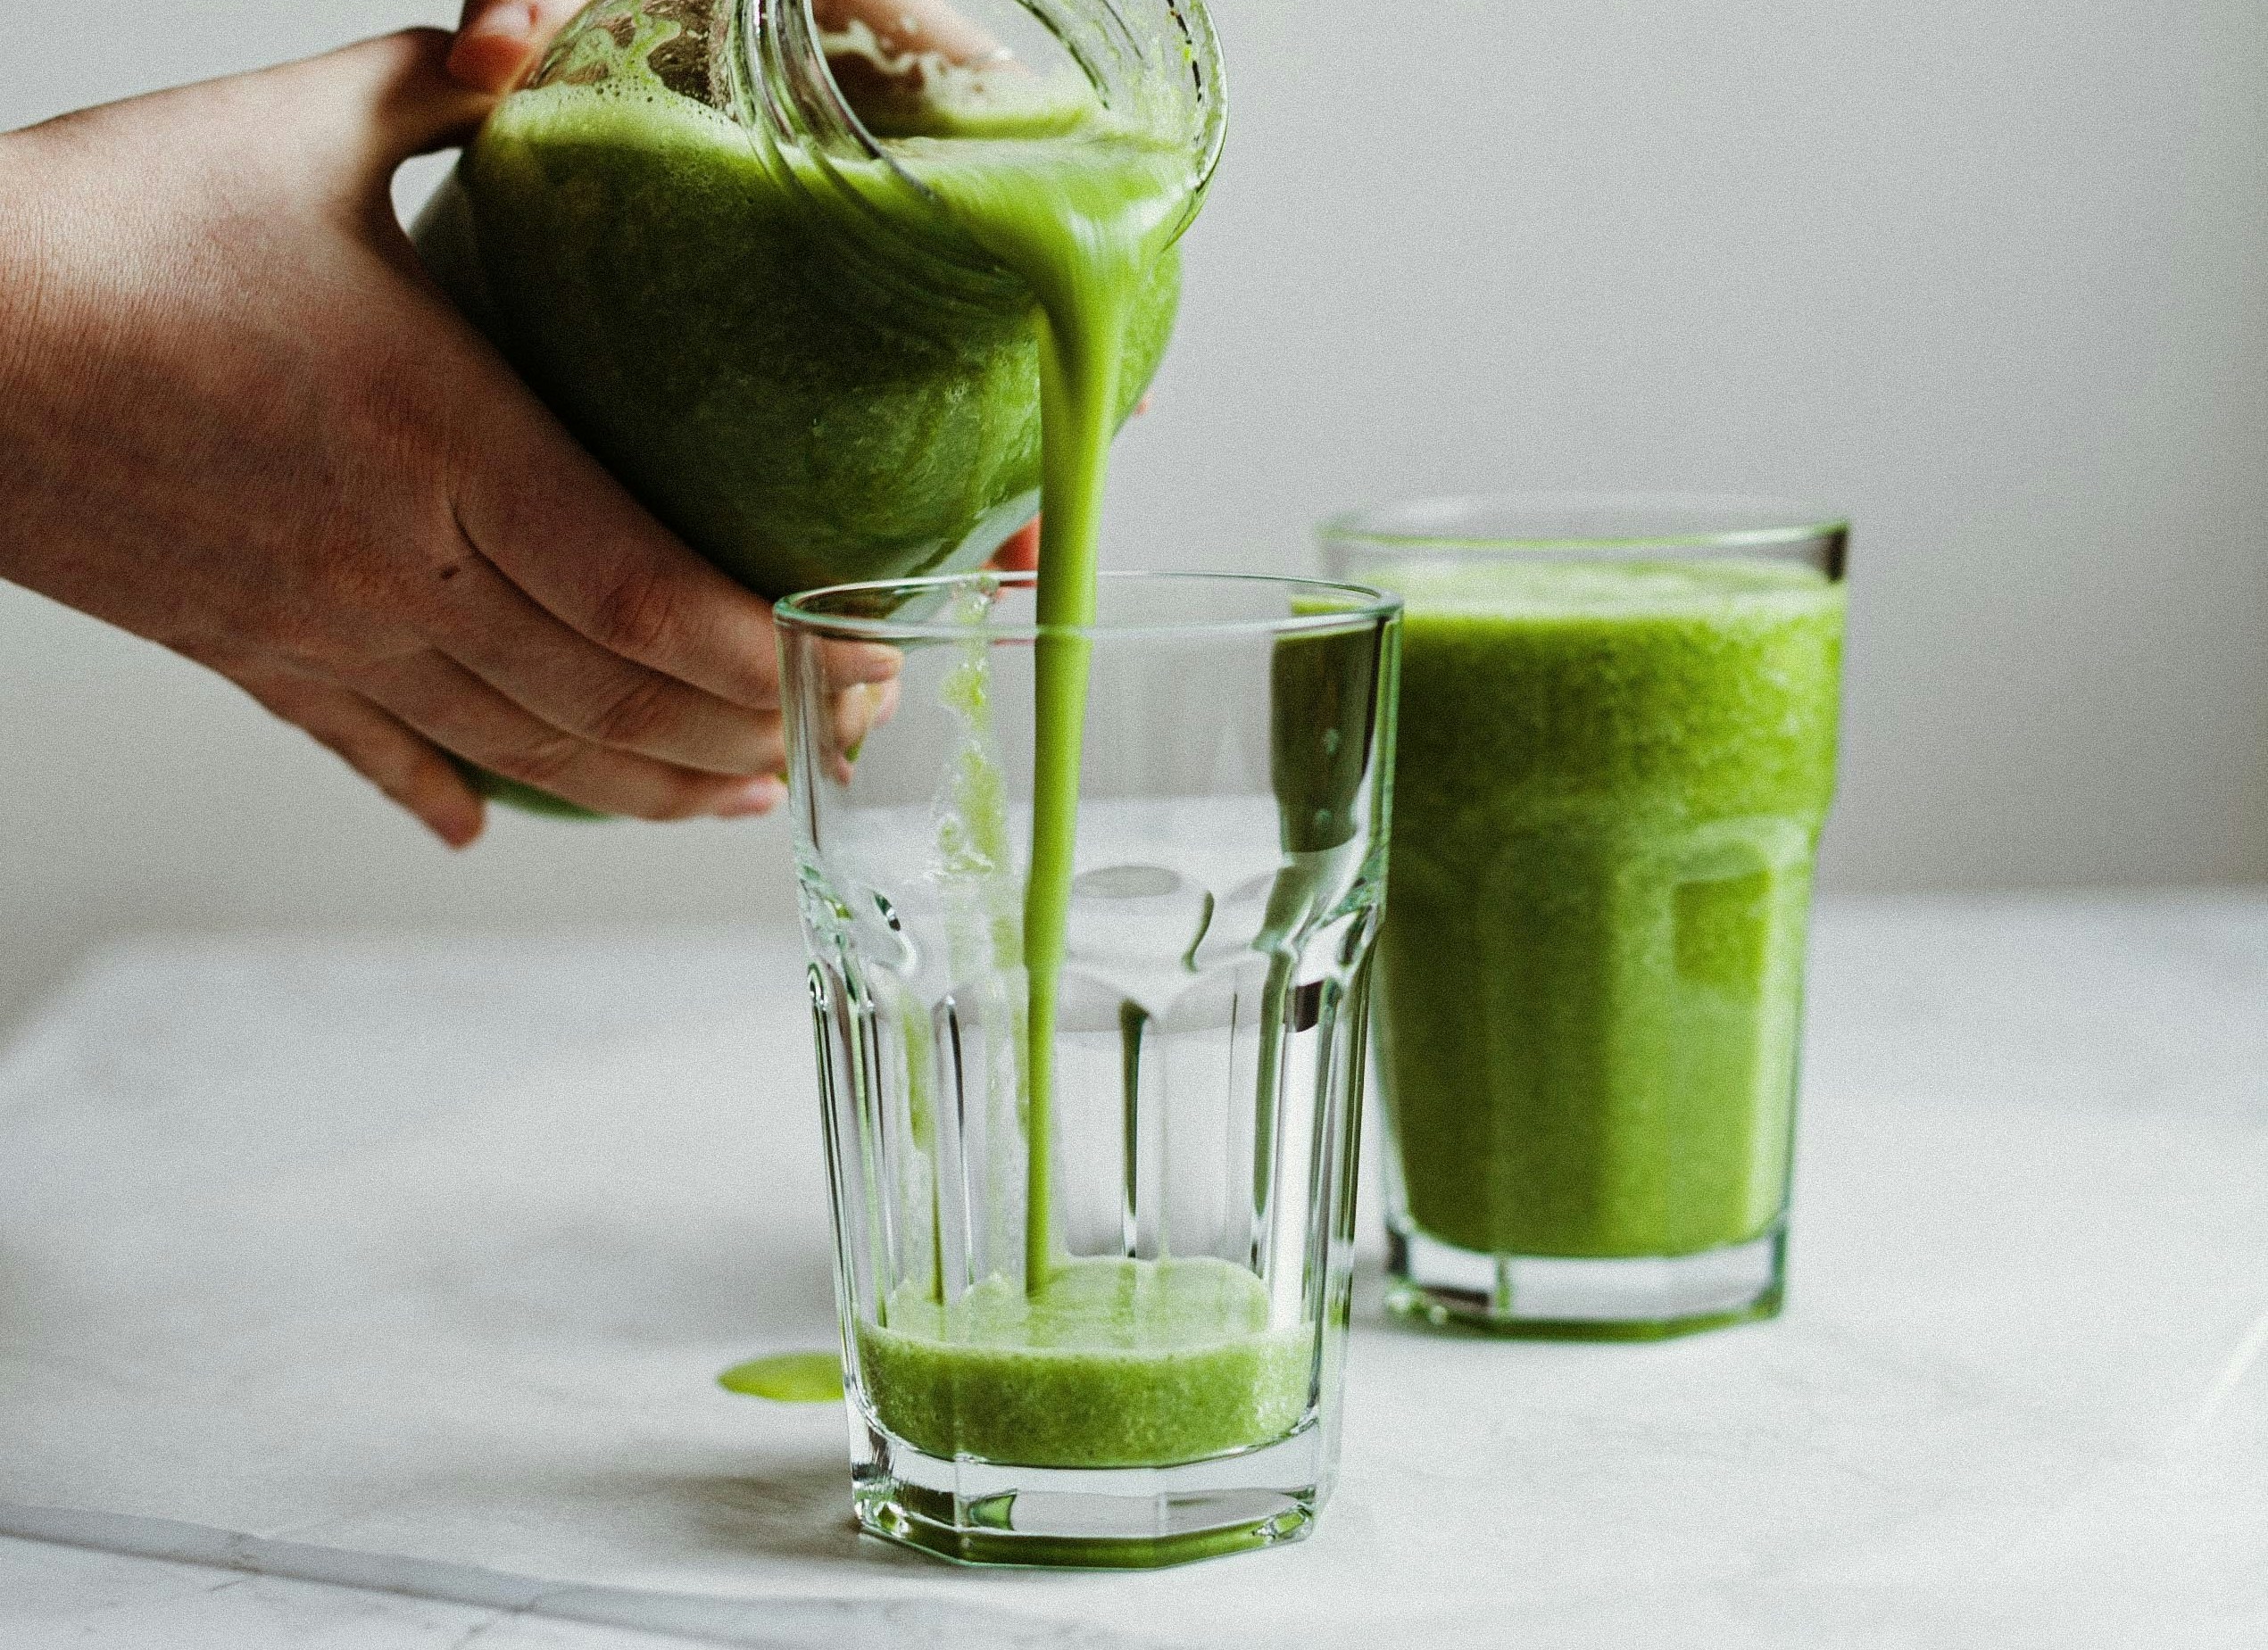 A healthy green smoothie perfect for breast cancer patients to increase their intake of antioxidants, vitamins, and minerals from fruits and vegetables.